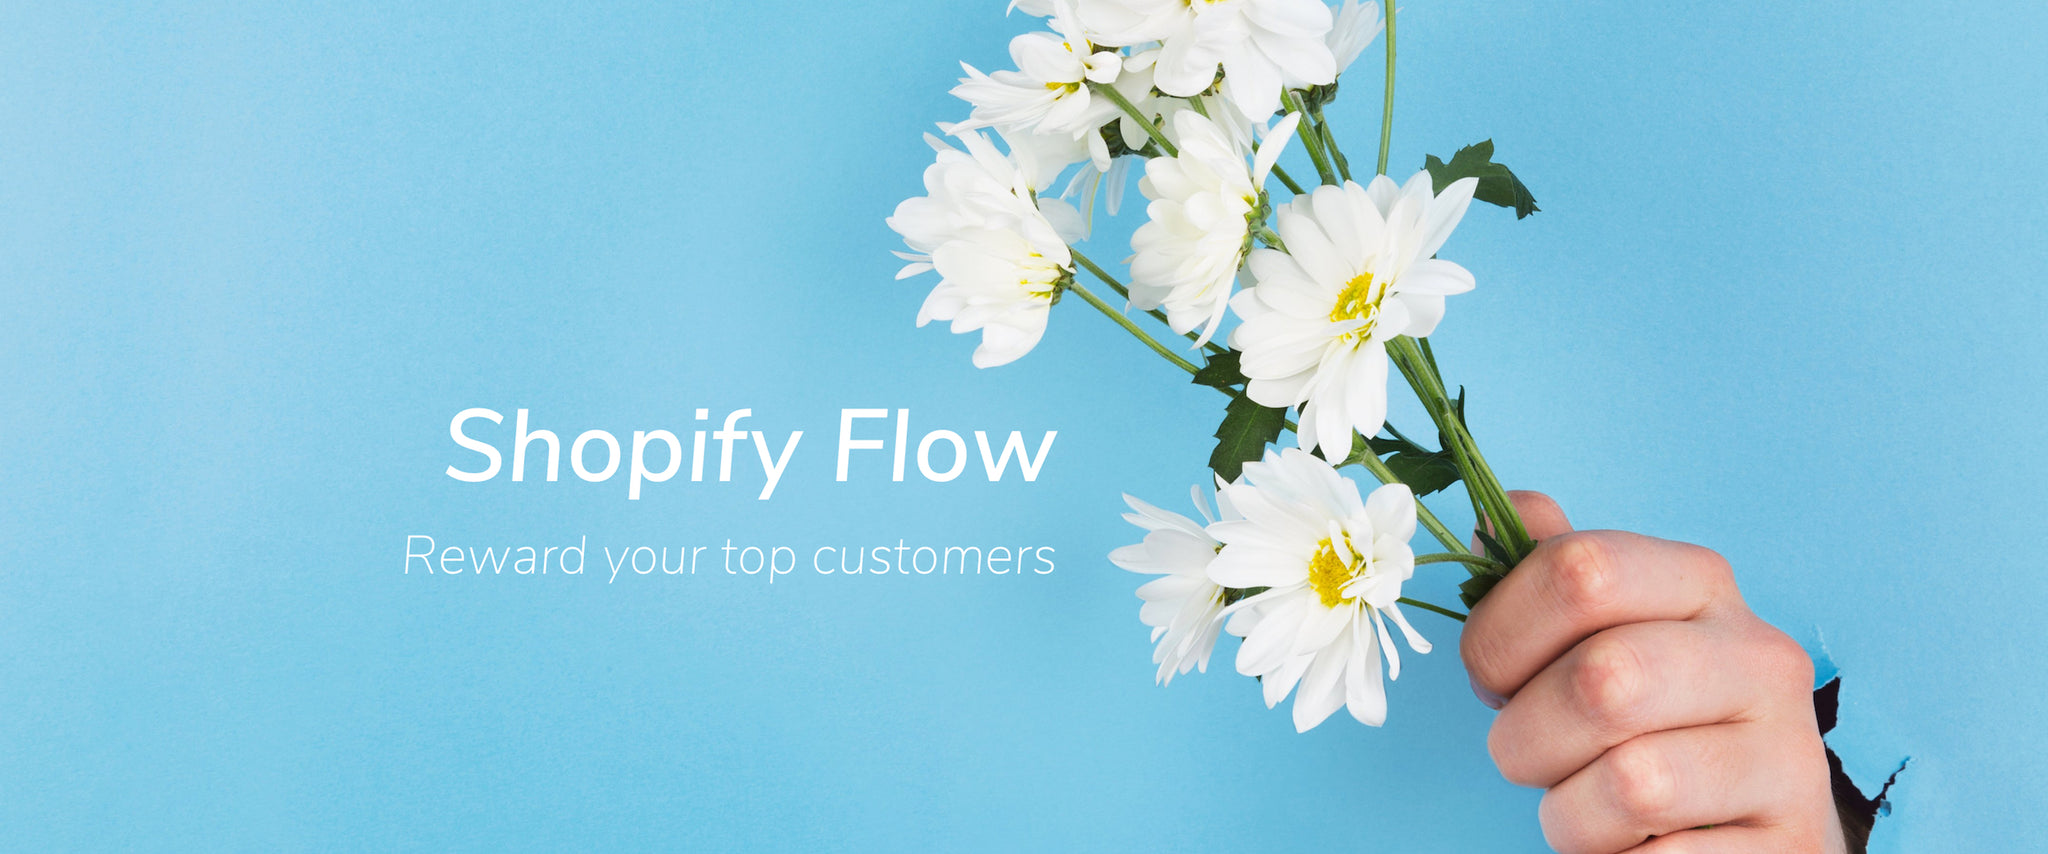 Use Flow to Reward Your Top Customers